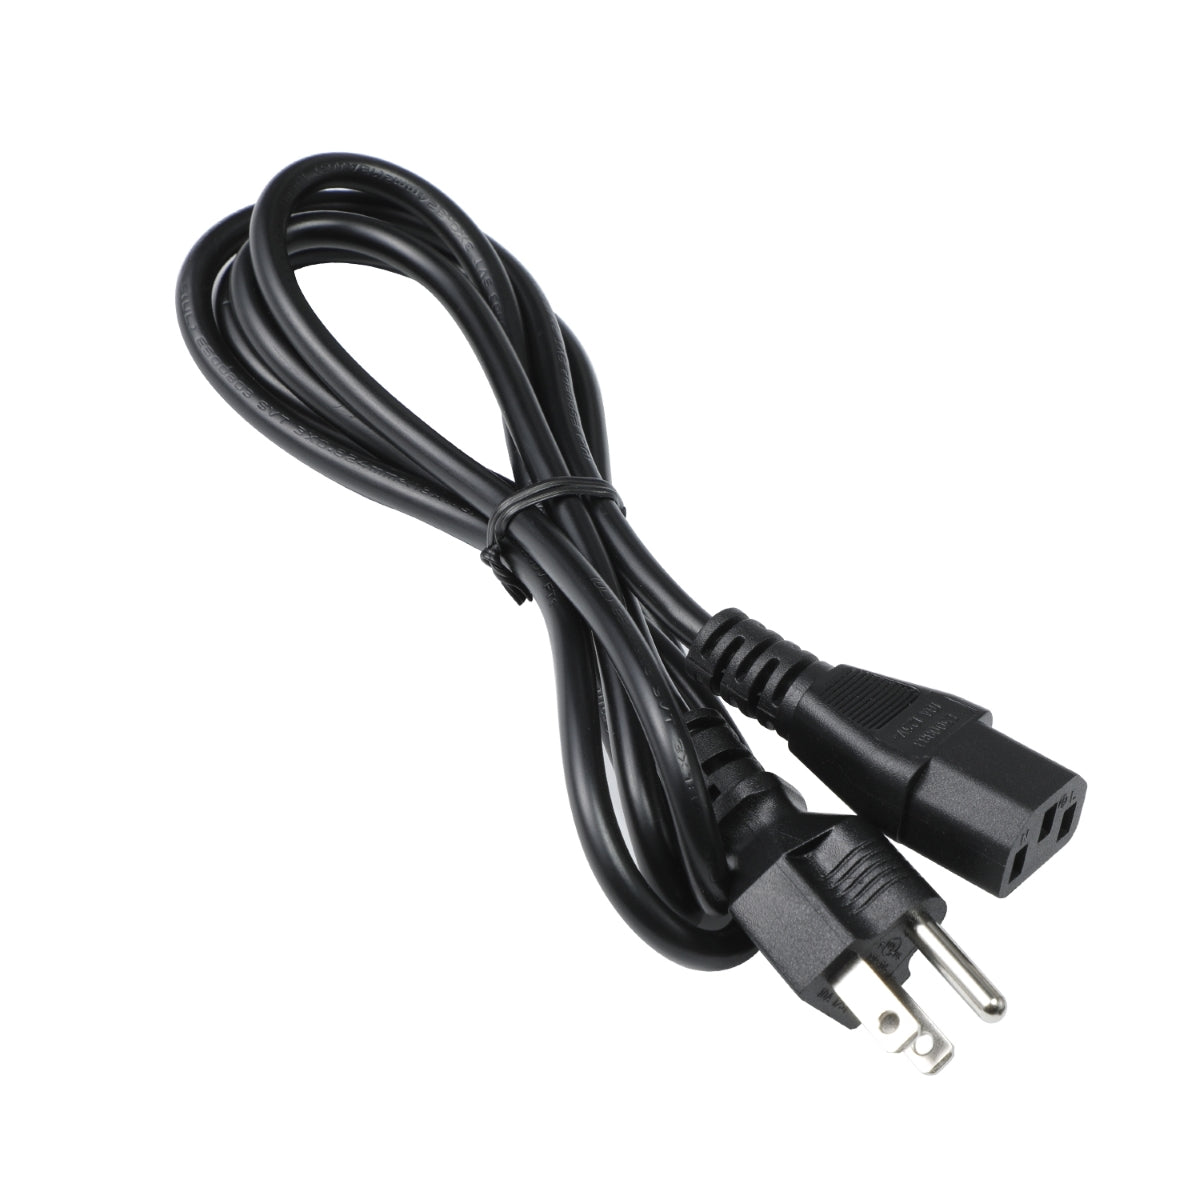 Power Cable for Philips 279P1TAA Monitor.